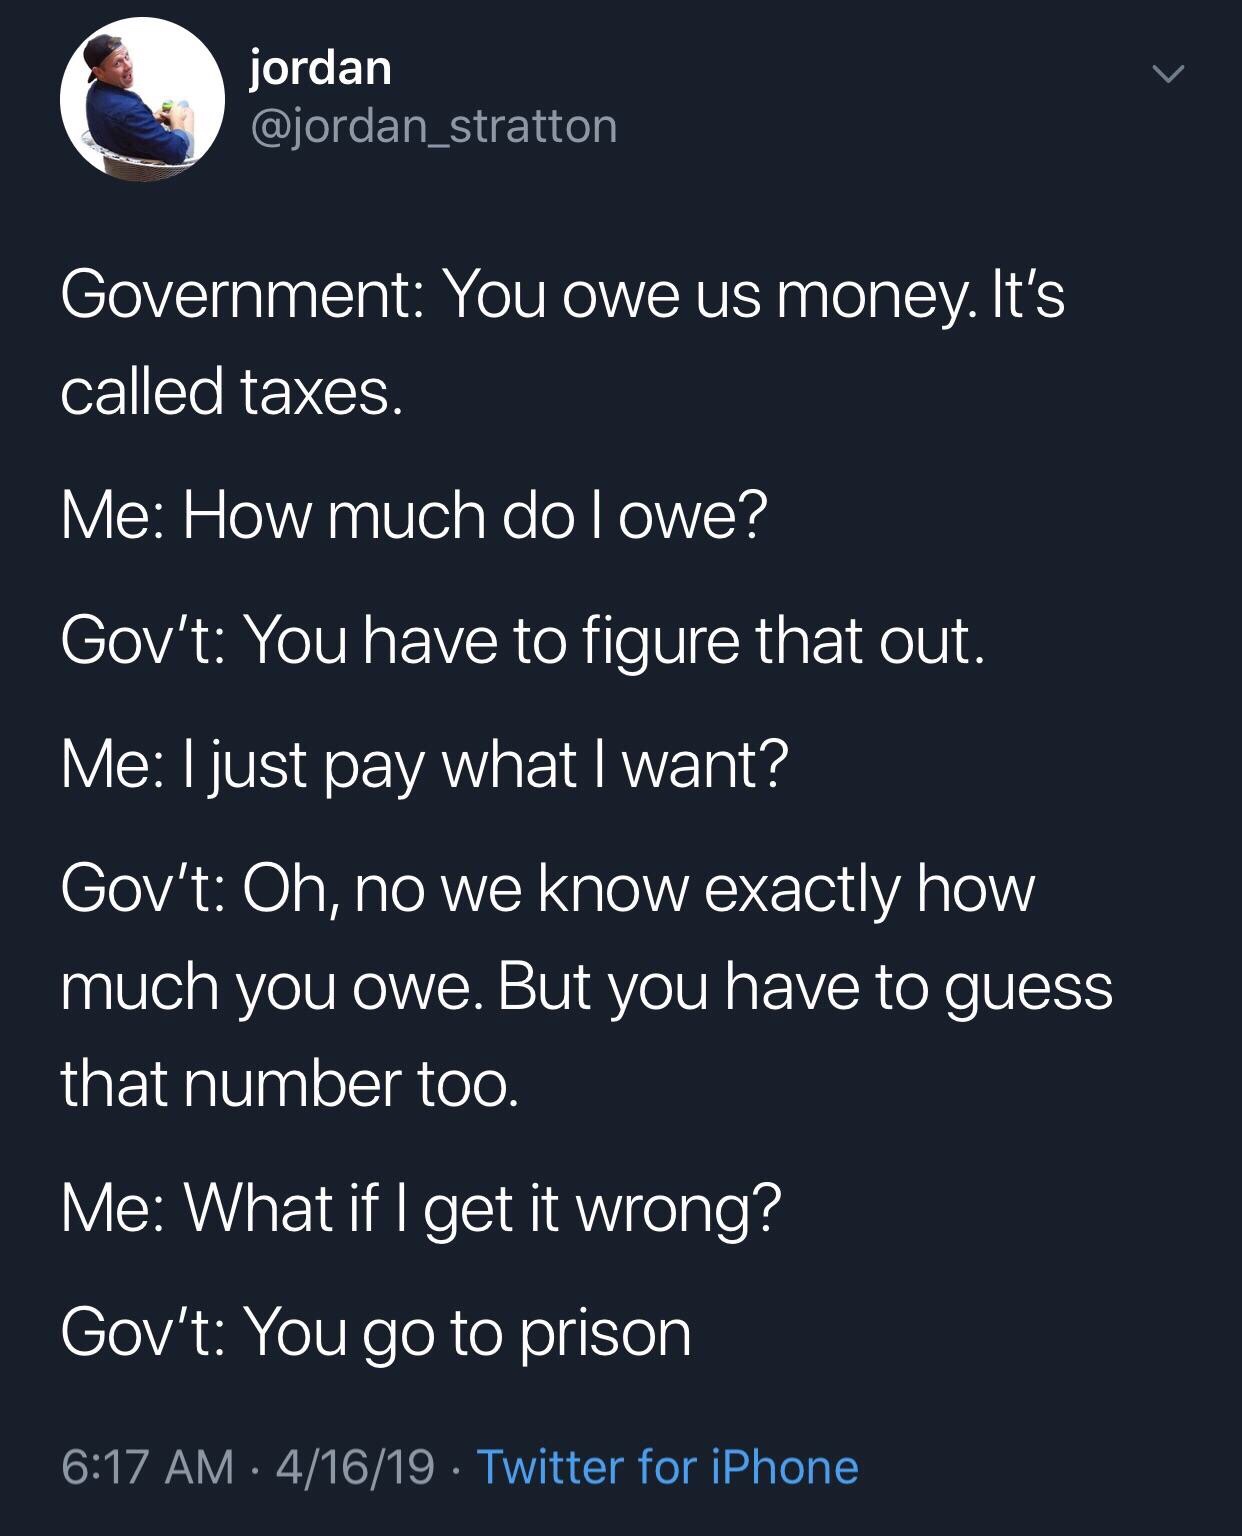 funny taxes tweet - jordan Government You owe us money. It's called taxes. Me How much do I owe? Gov't You have to figure that out. Me I just pay what I want? Gov't Oh, no we know exactly how much you owe. But you have to guess that number too. Me What if